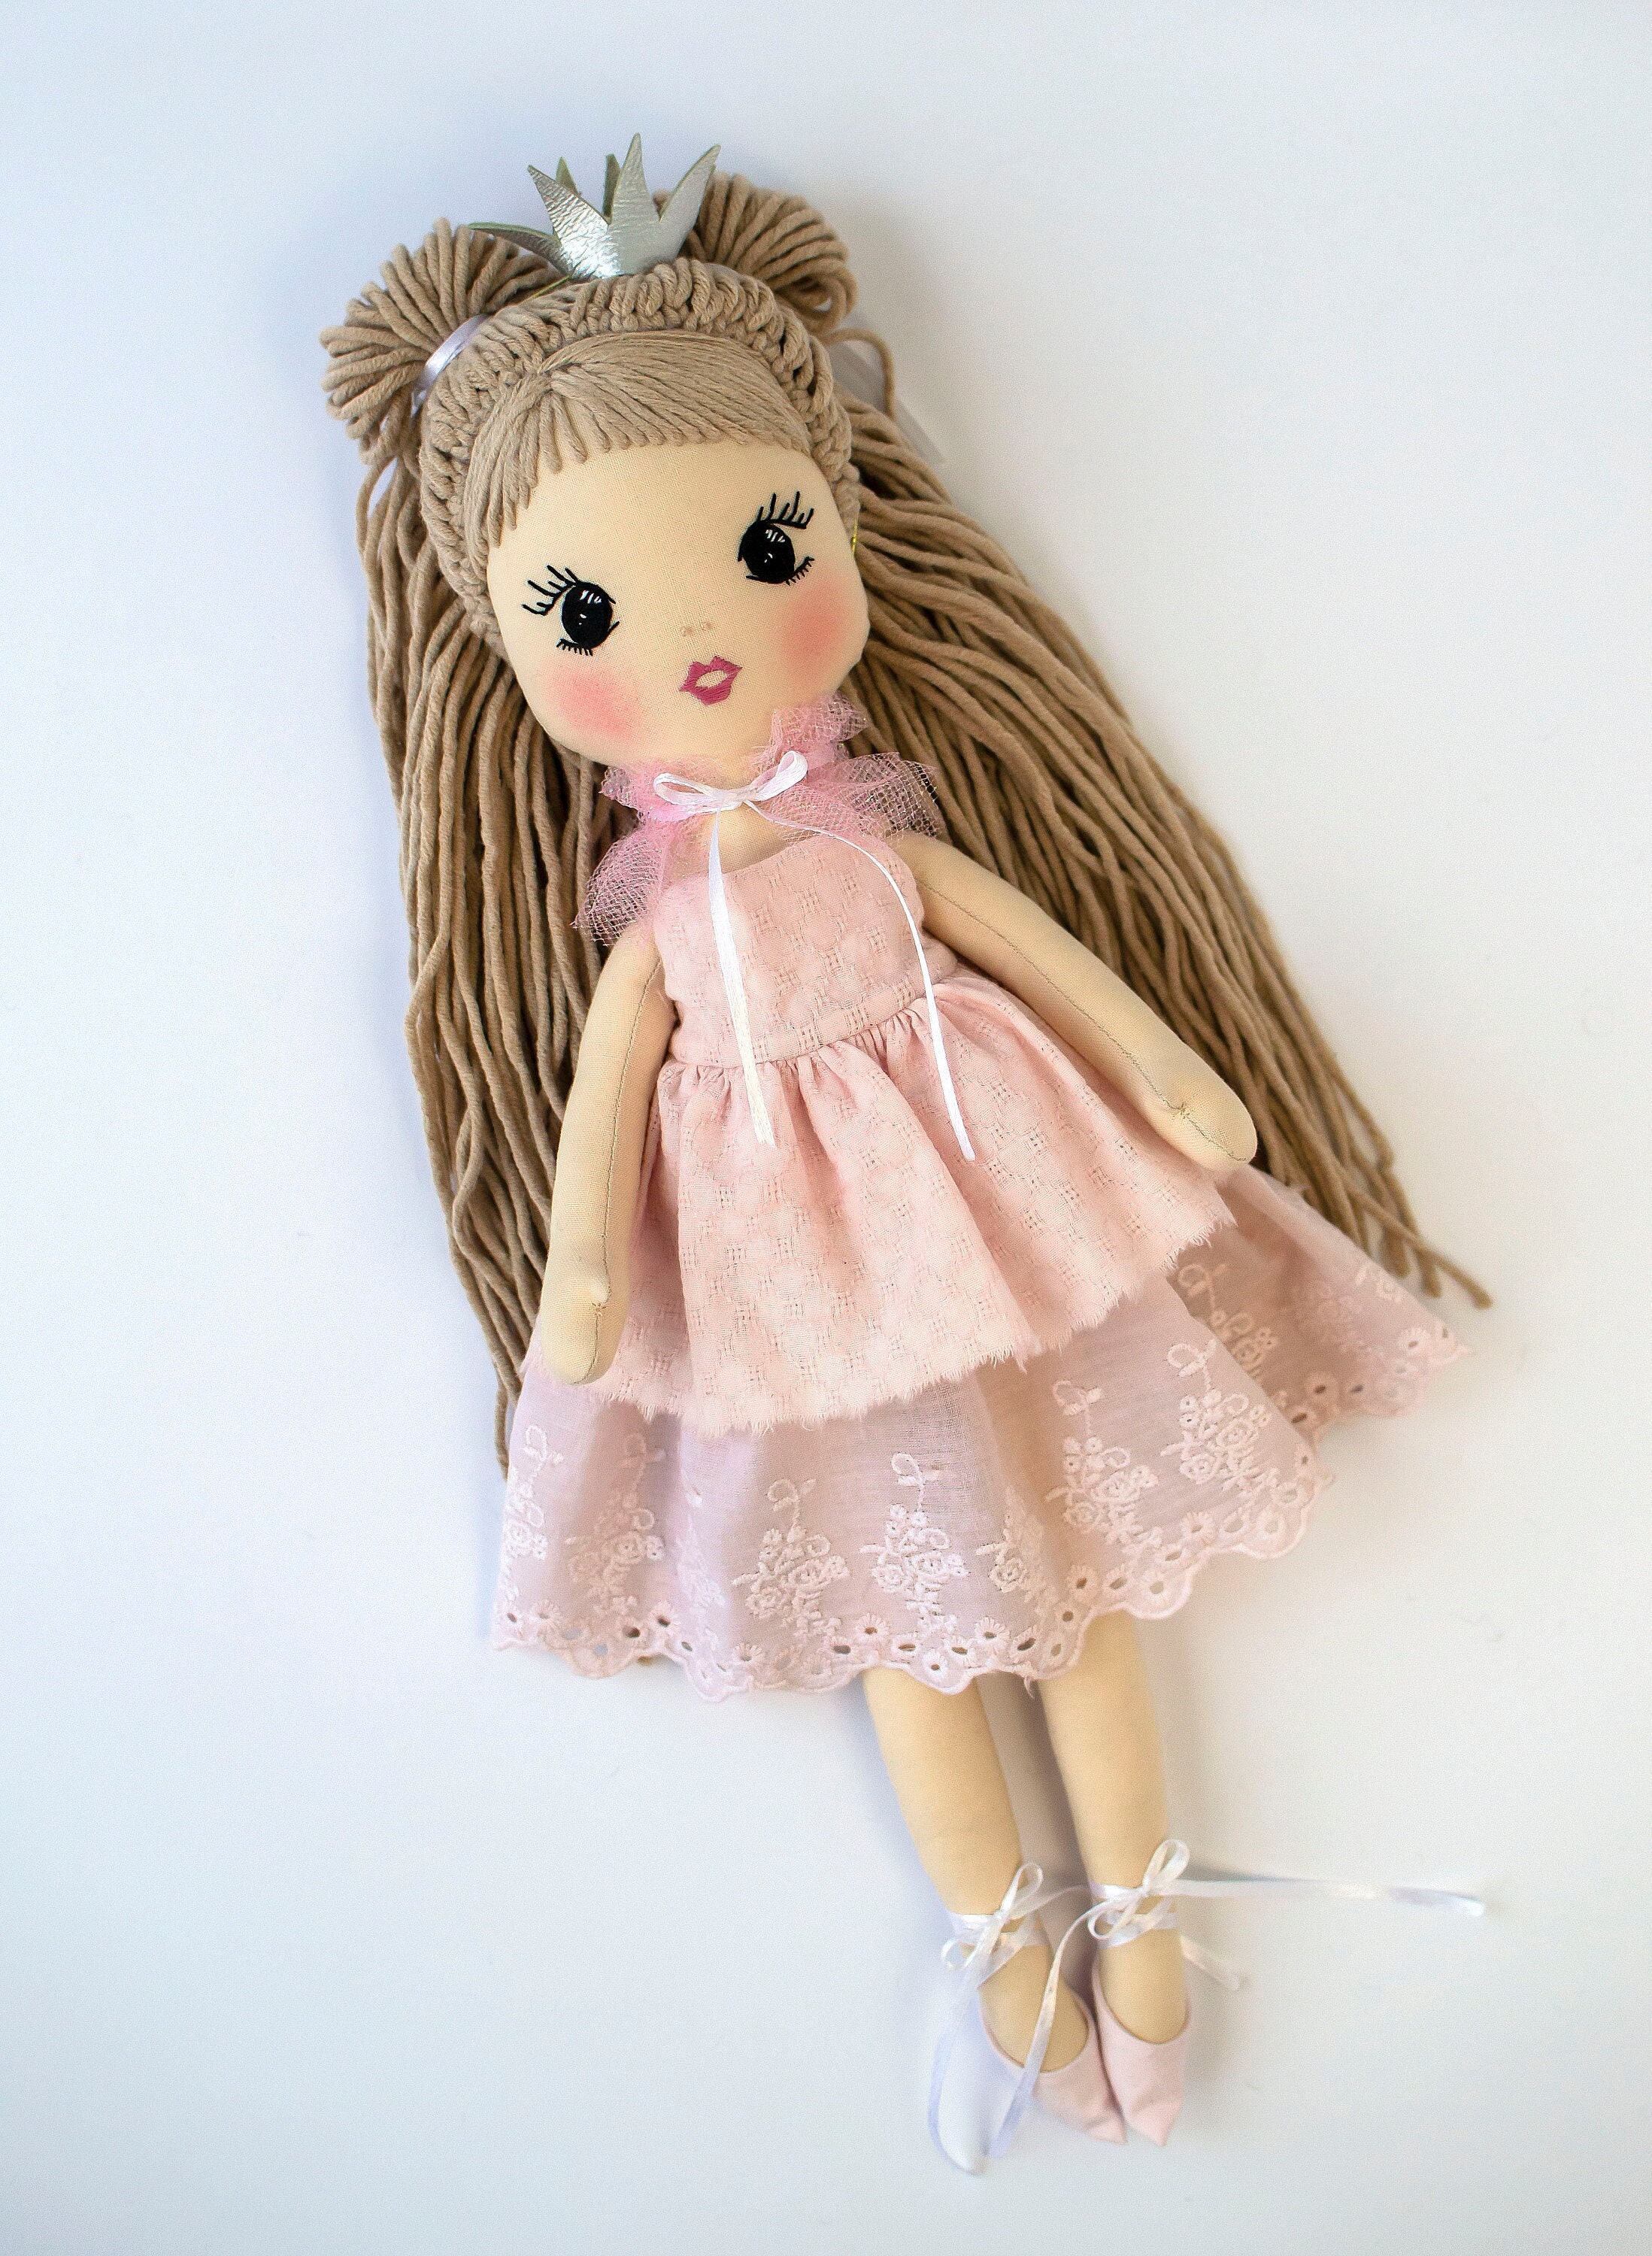 Bendy Rope Doll Body - Small - A Child's Dream